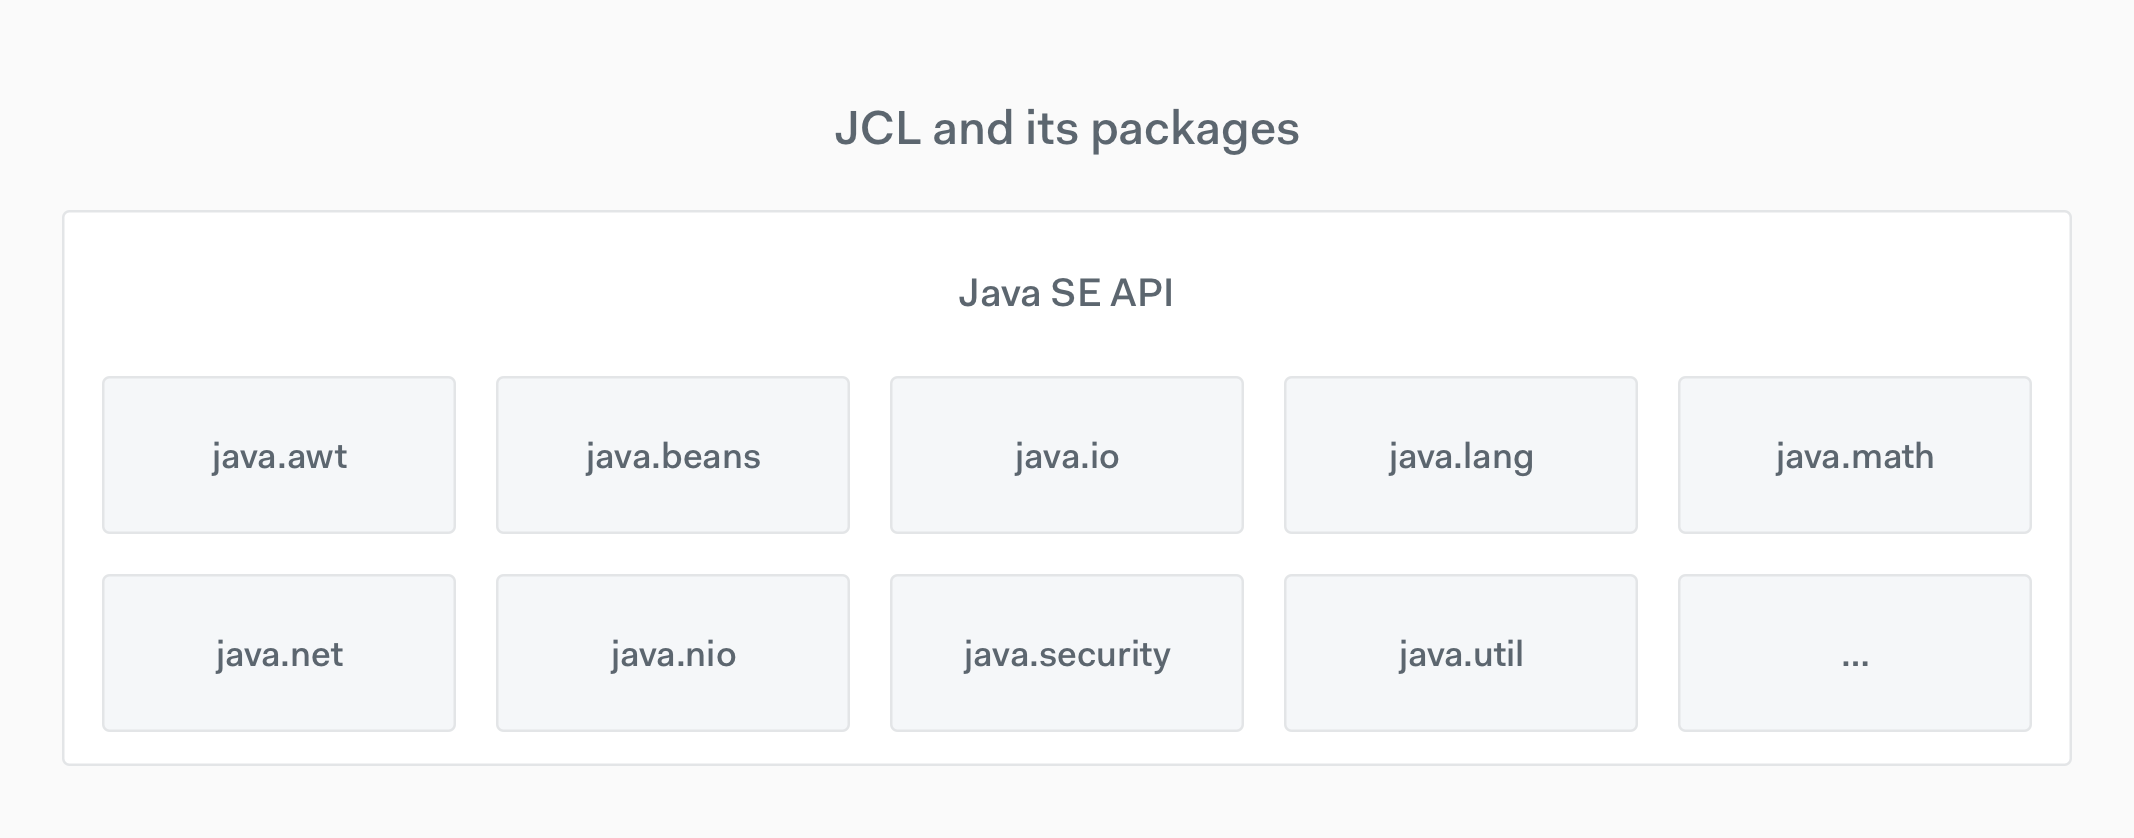 Java SE API and some of its packages